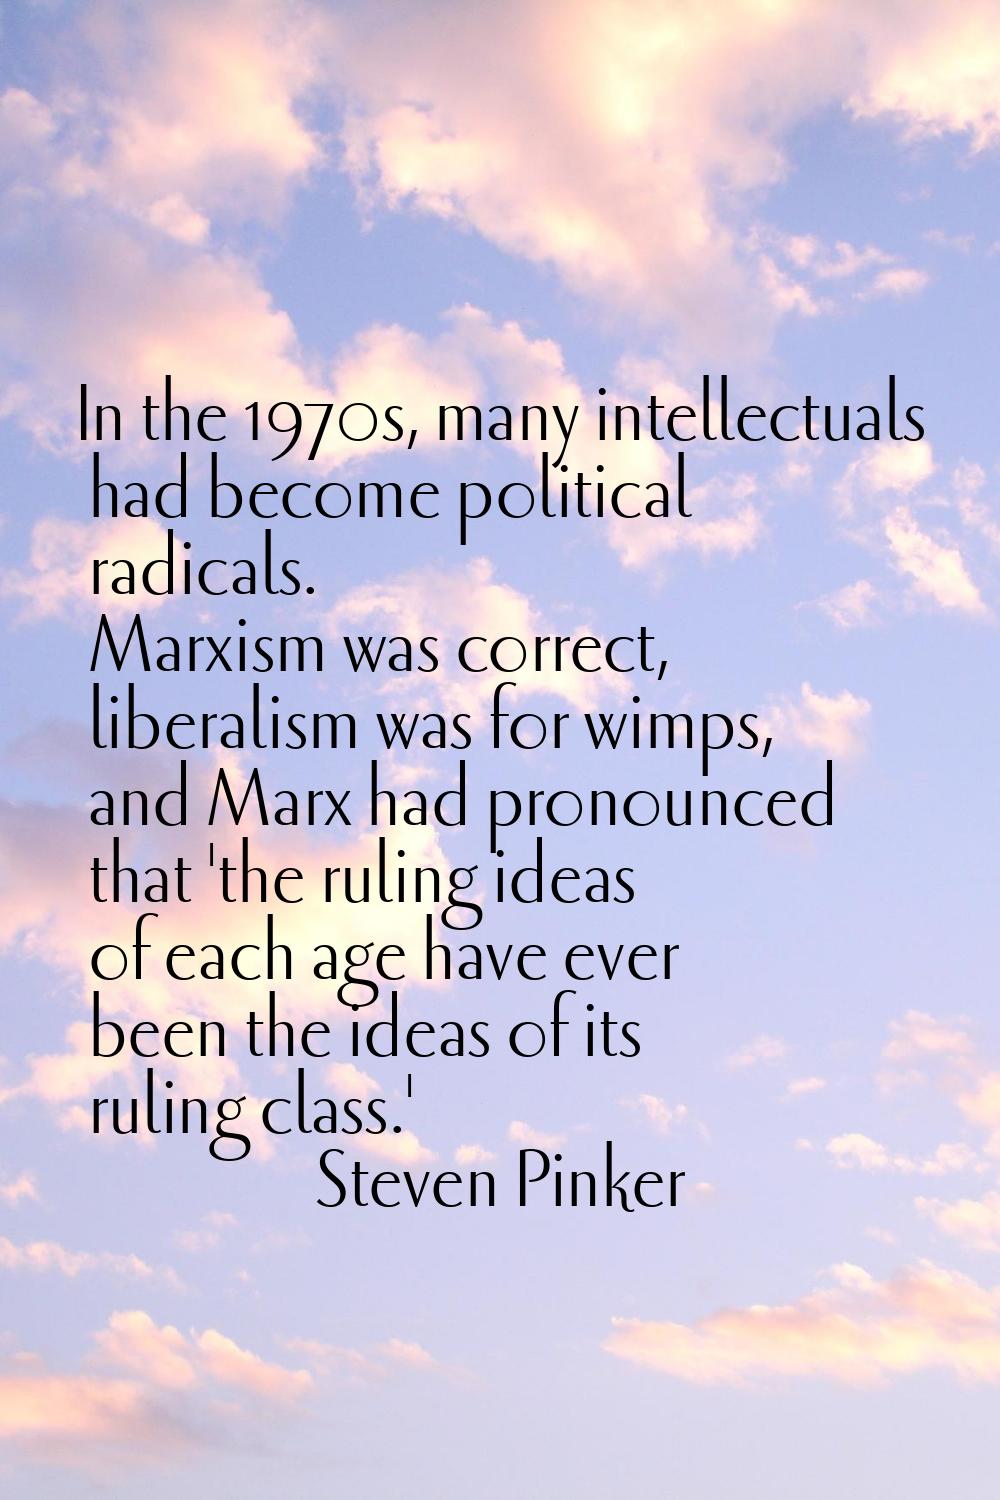 In the 1970s, many intellectuals had become political radicals. Marxism was correct, liberalism was